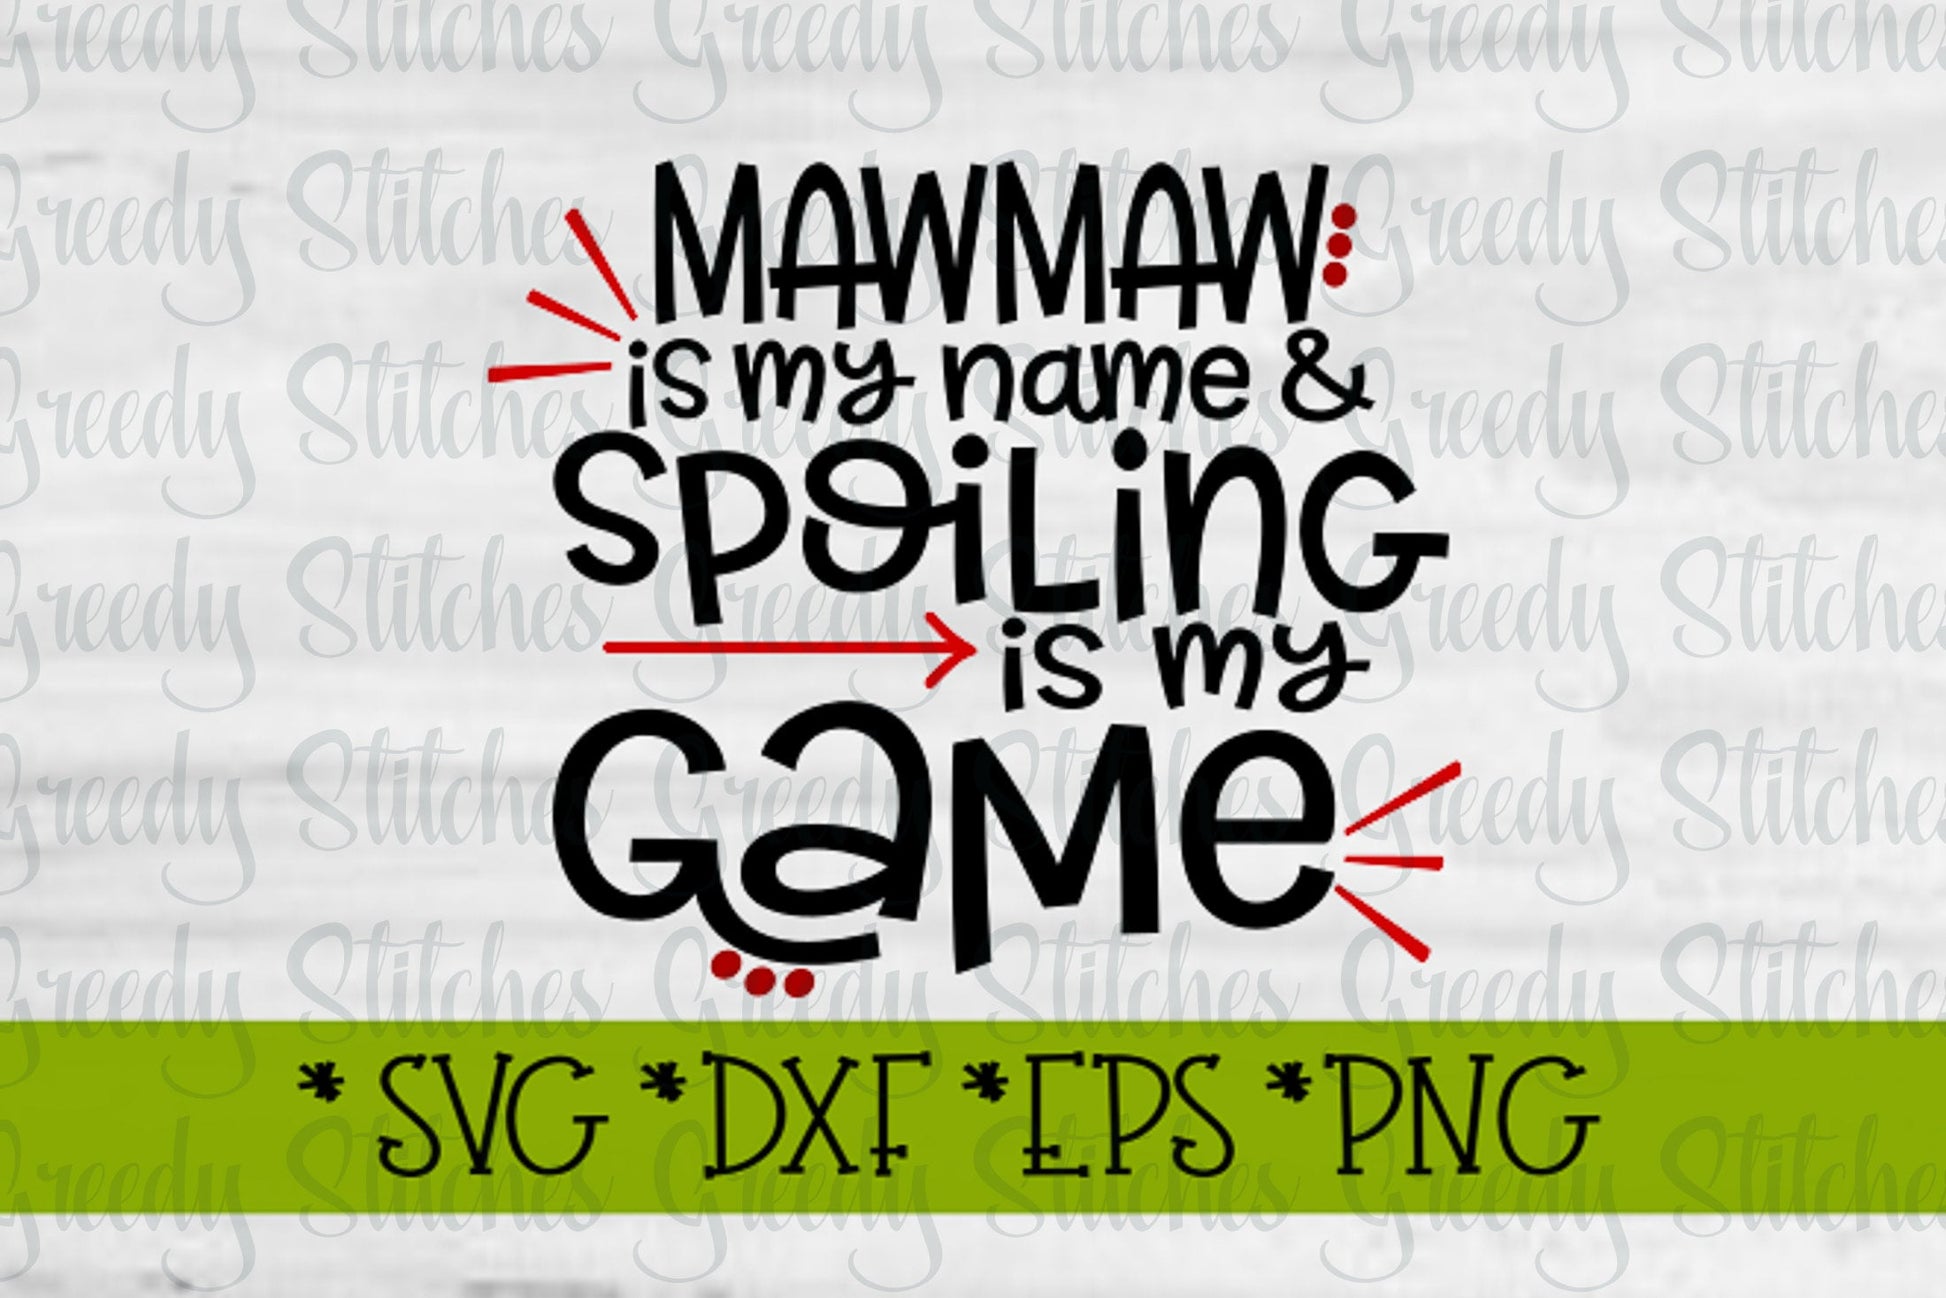 Mother&#39;s Day | Mawmaw Is My Name & Spoiling Is My Game svg, dxf, eps, png. Mawmaw SVG | MawMaw Is Loved SVG | Instant Download Cut File.